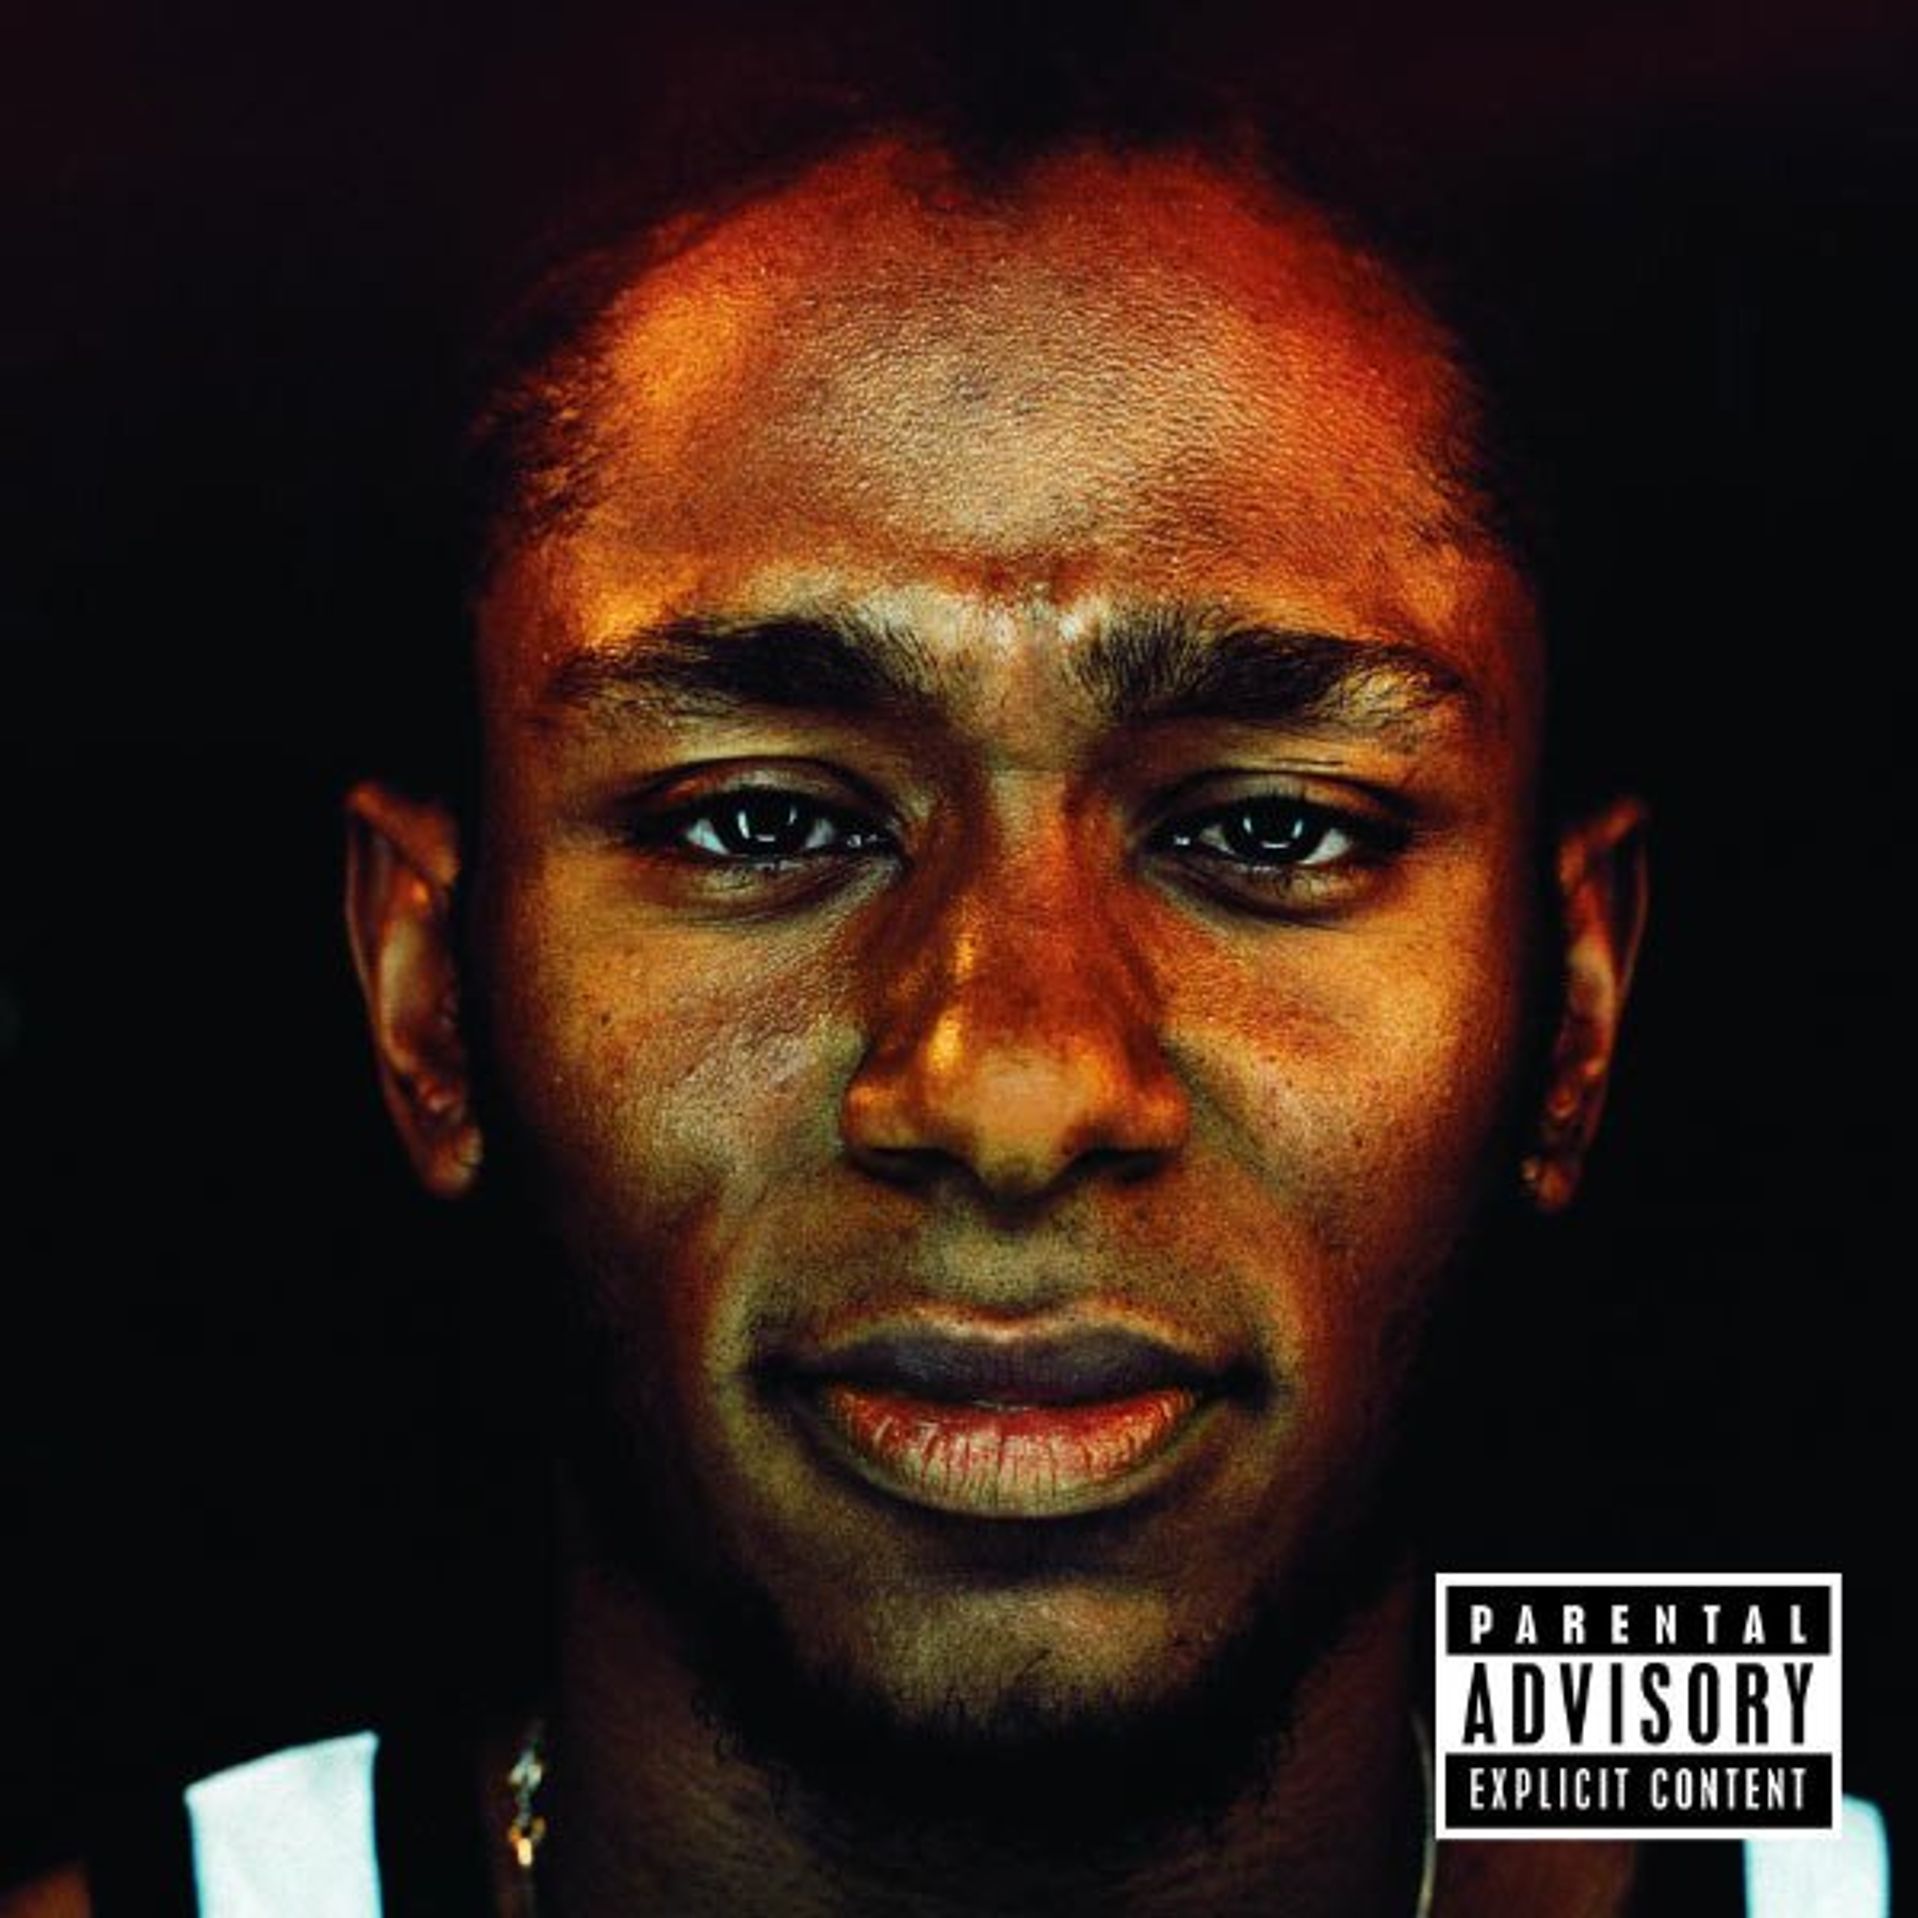 Album Title: Black on Both Sides by: Mos Def